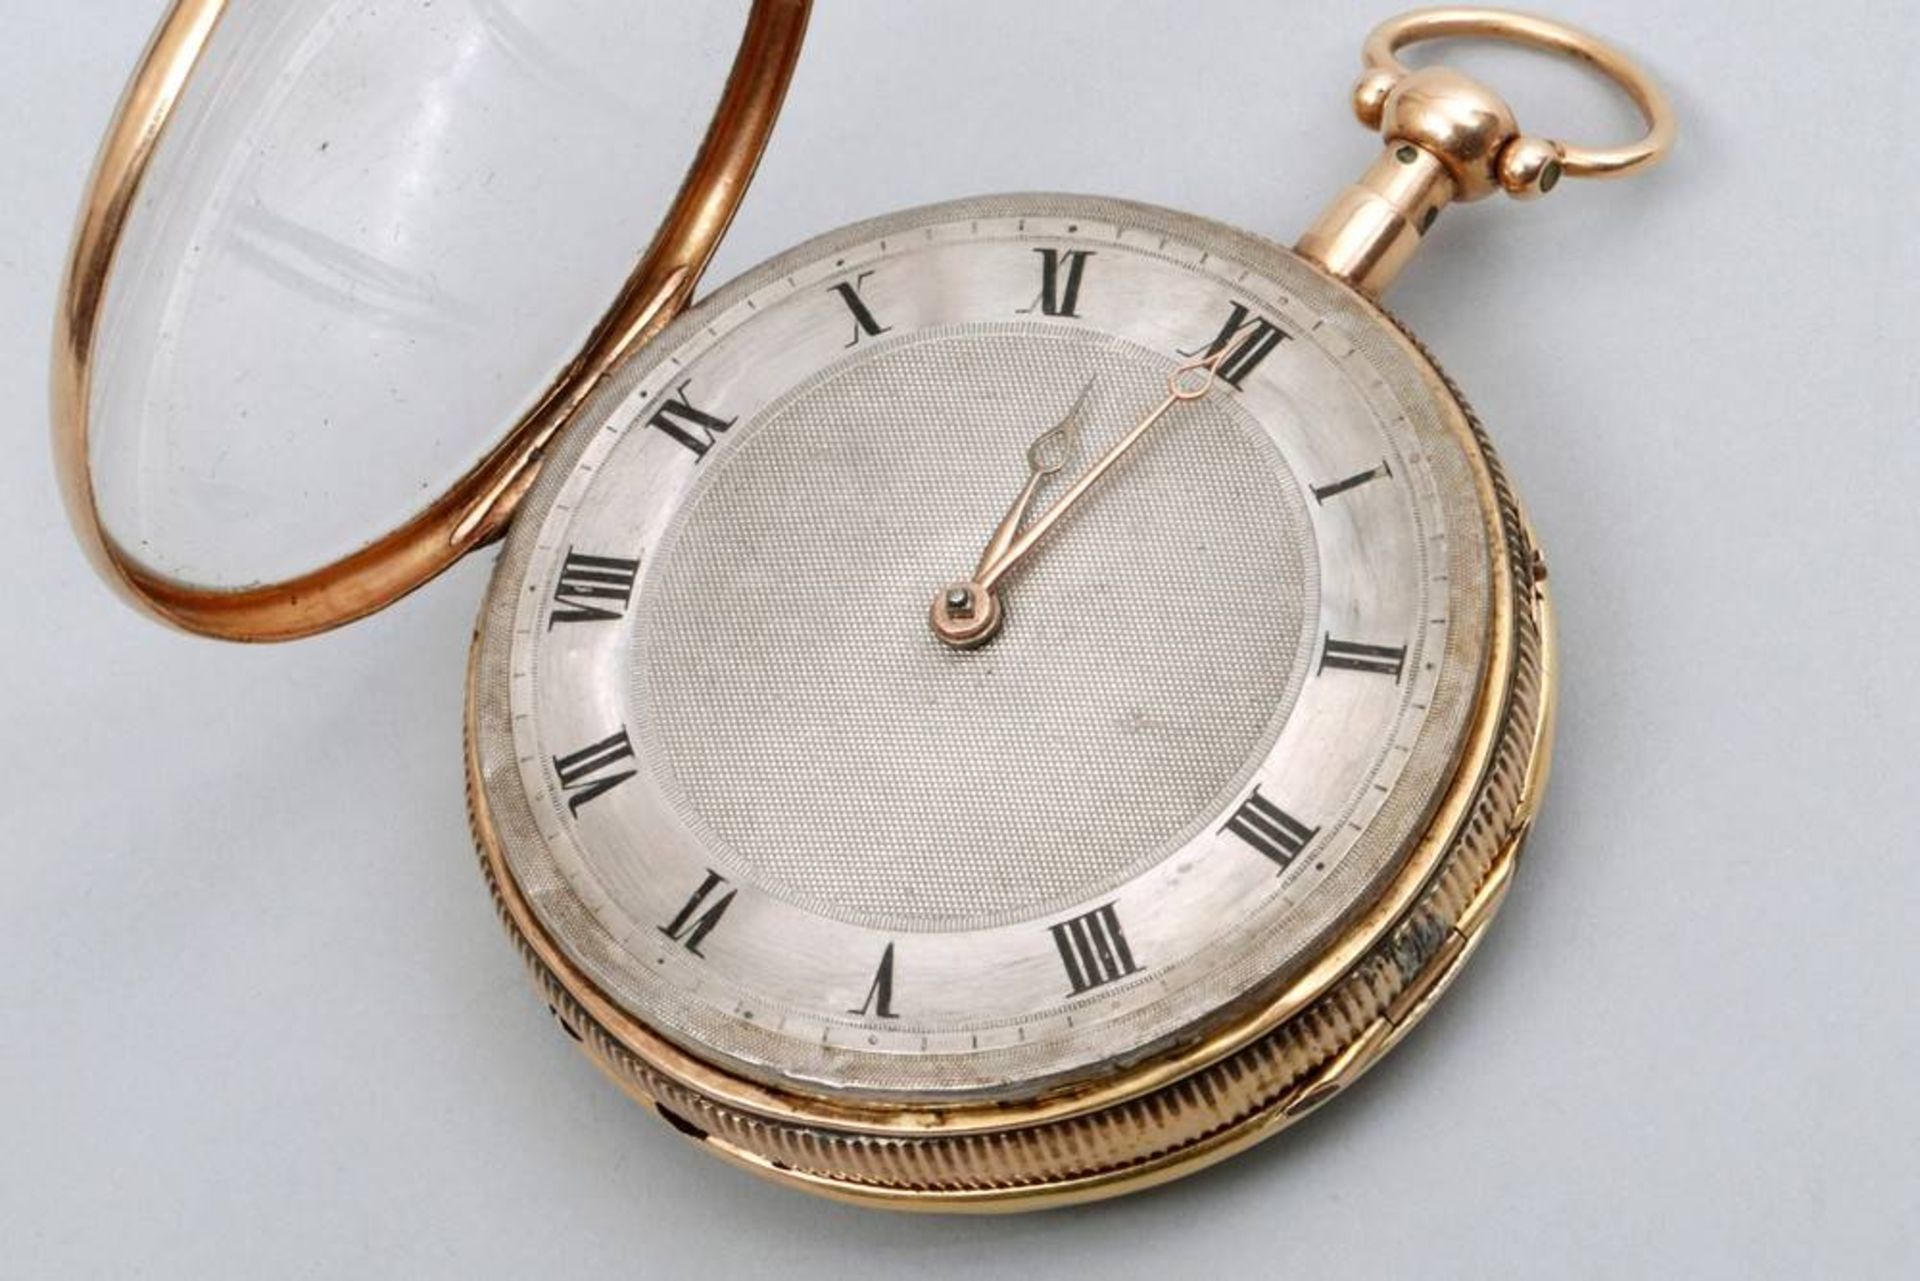 Repeater pocket watch